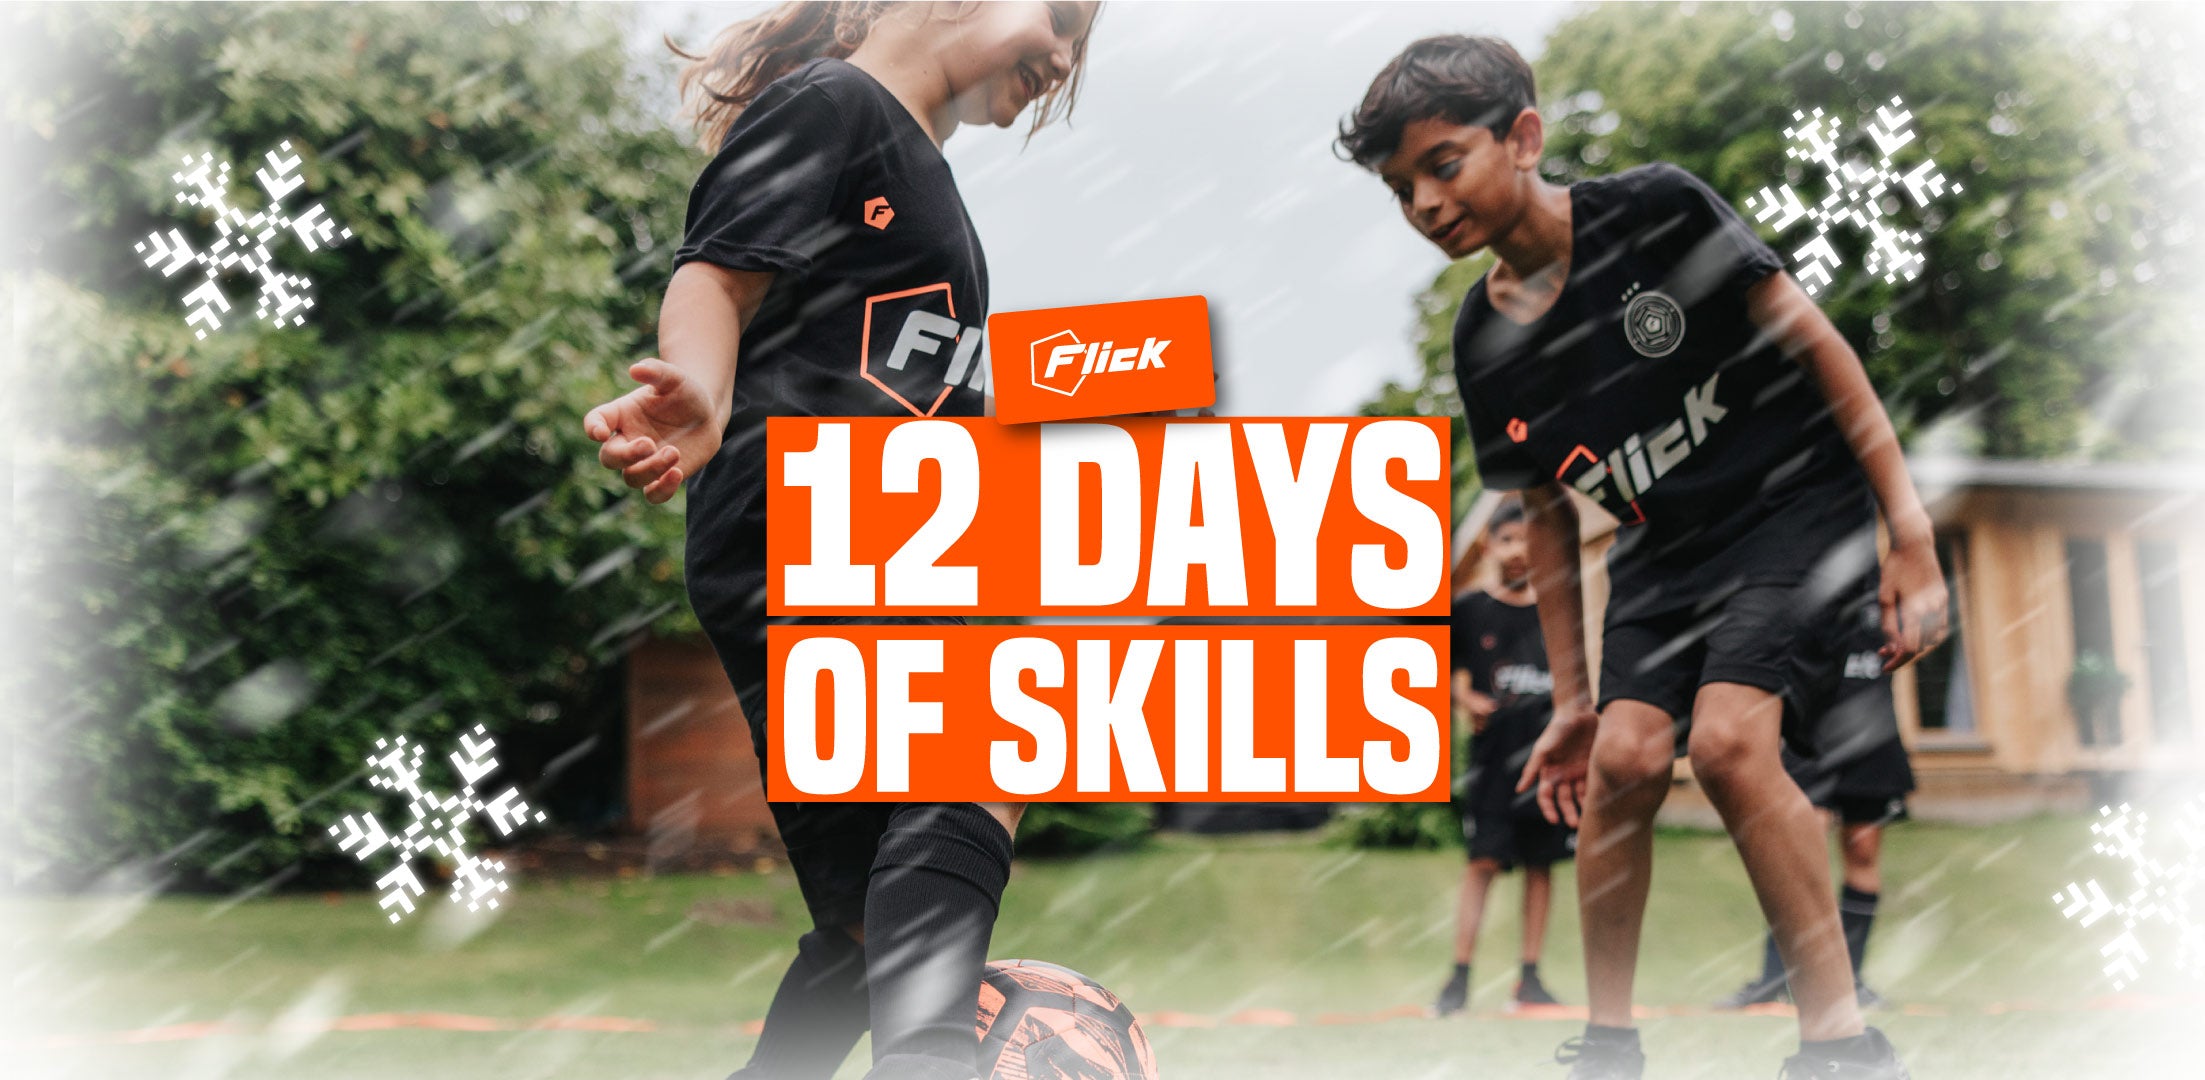 12 Days of Skills is here!